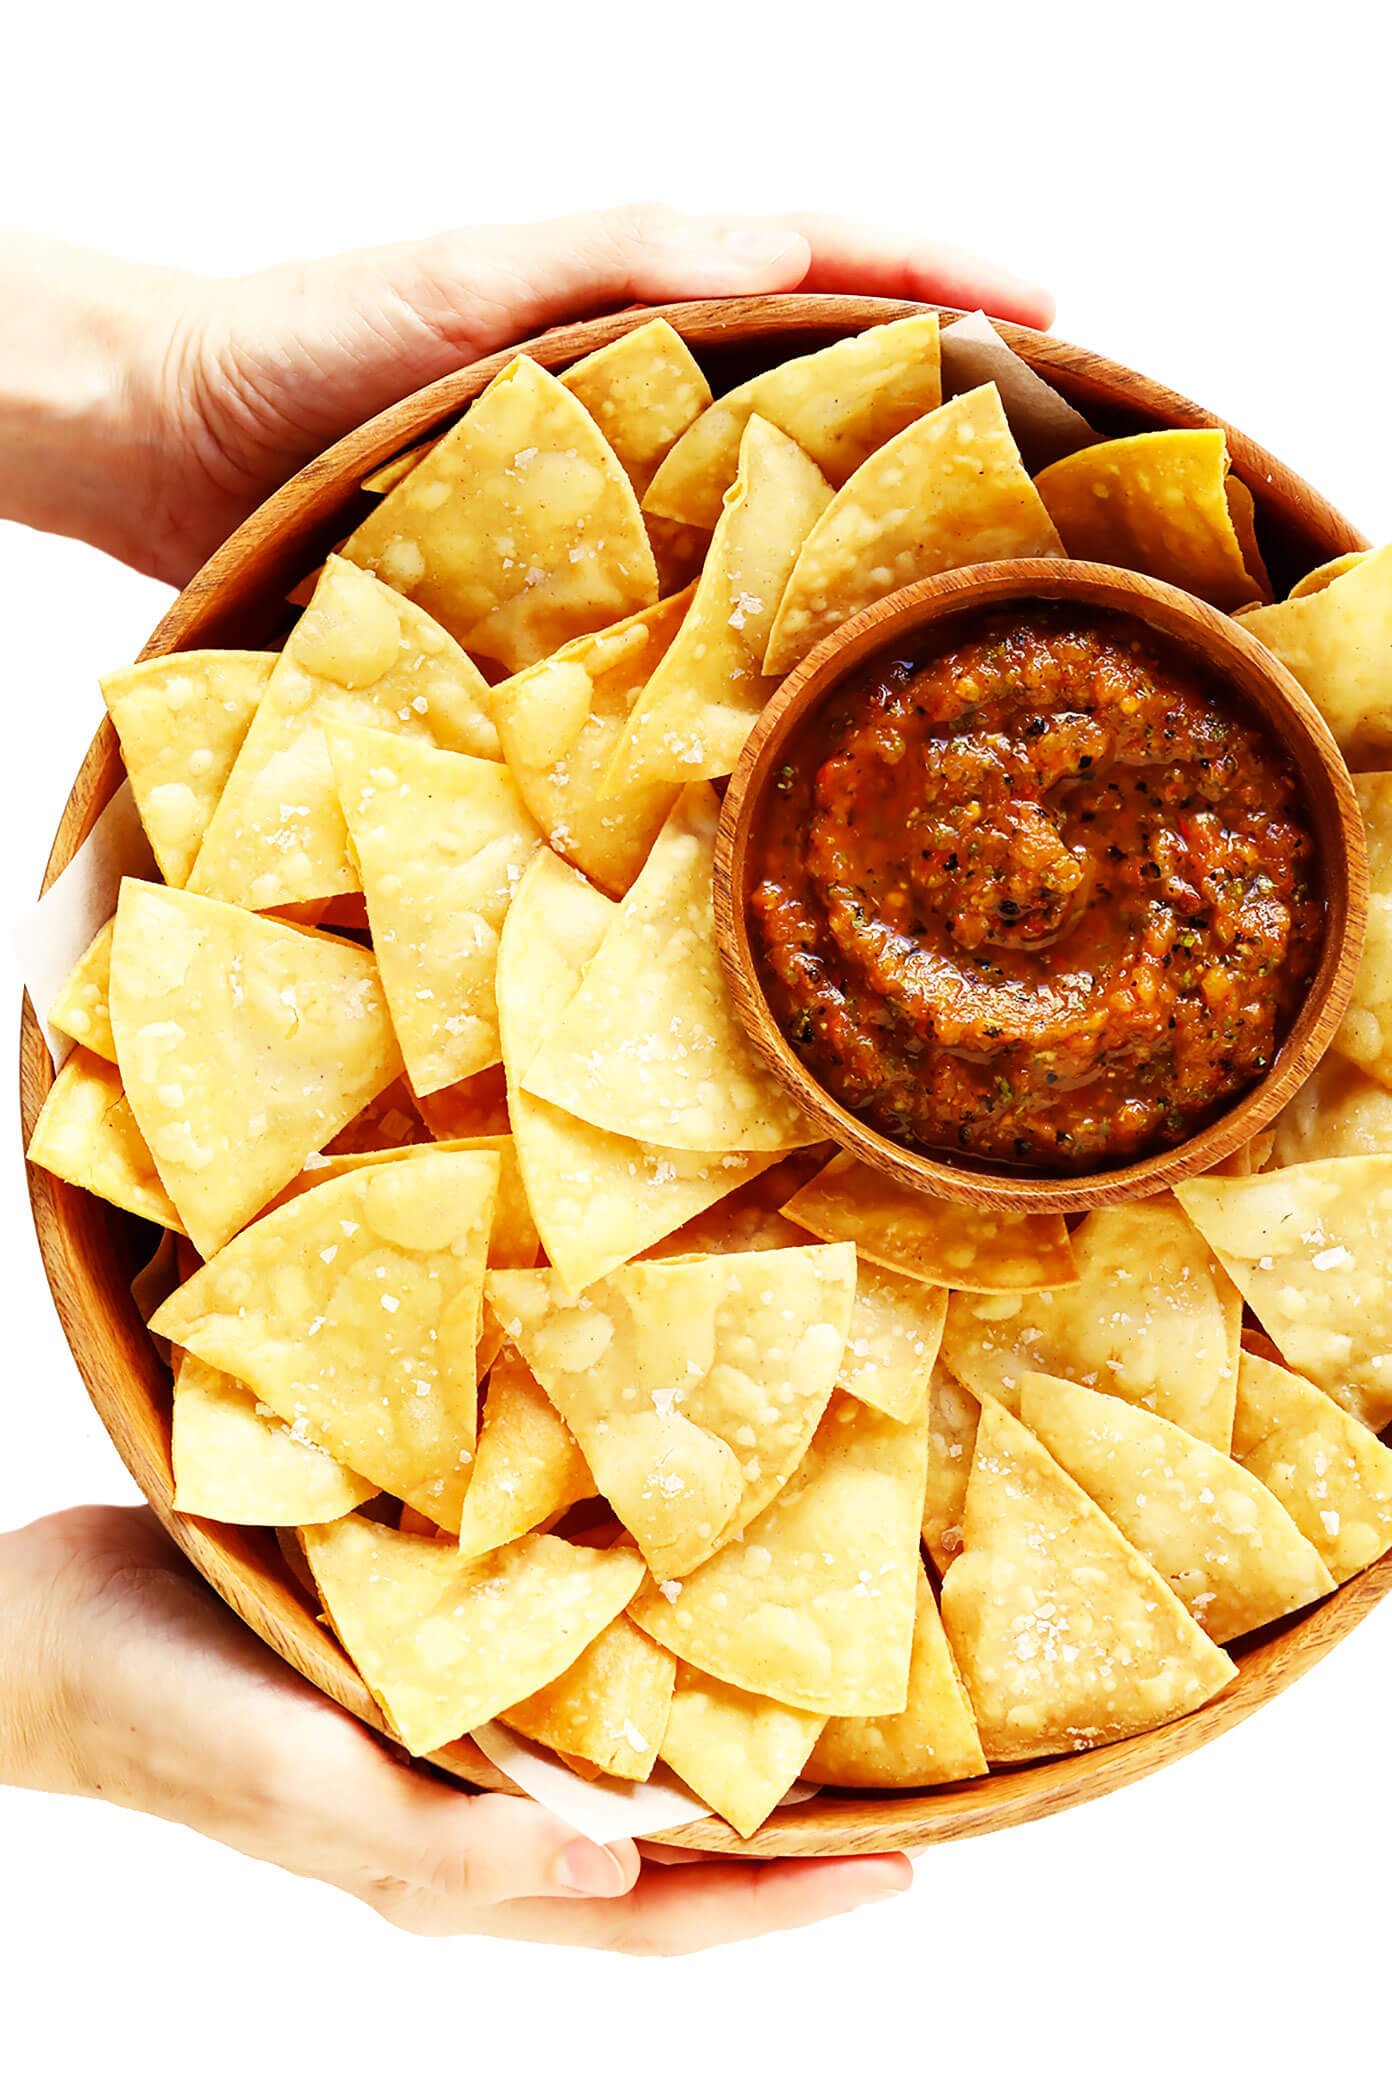 Homemade Tortilla Chips with Roasted Tomato Salsa